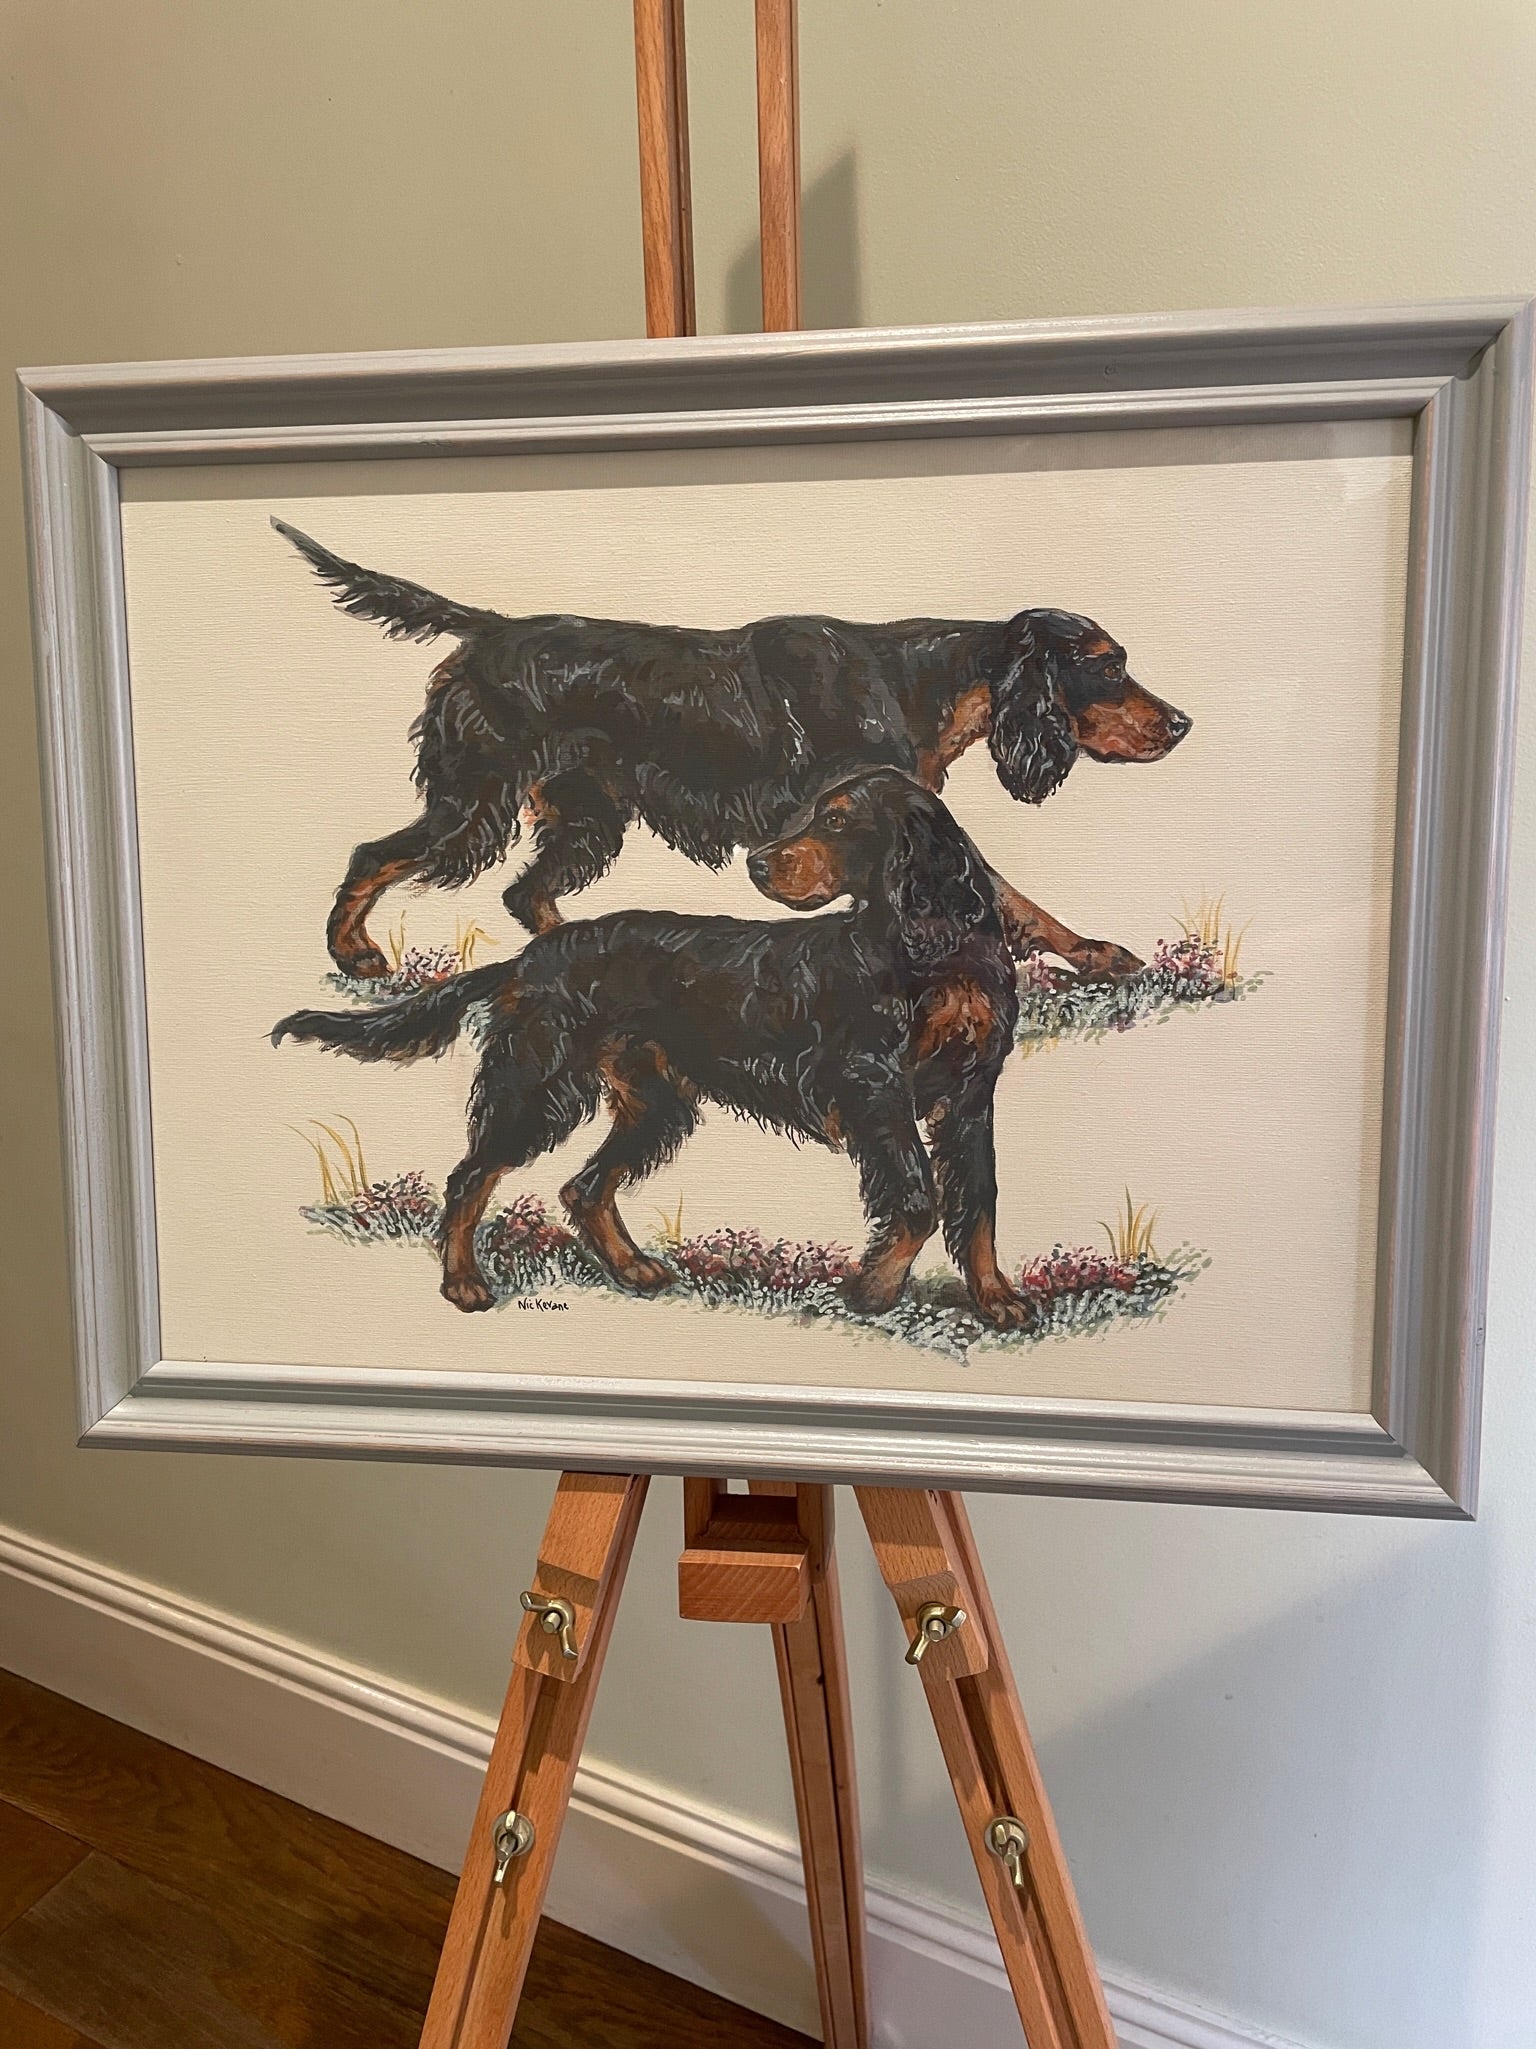 This painting shows two traditional gundogs hunting. I love to paint working dog breeds. Inspired by old country sporting prints.